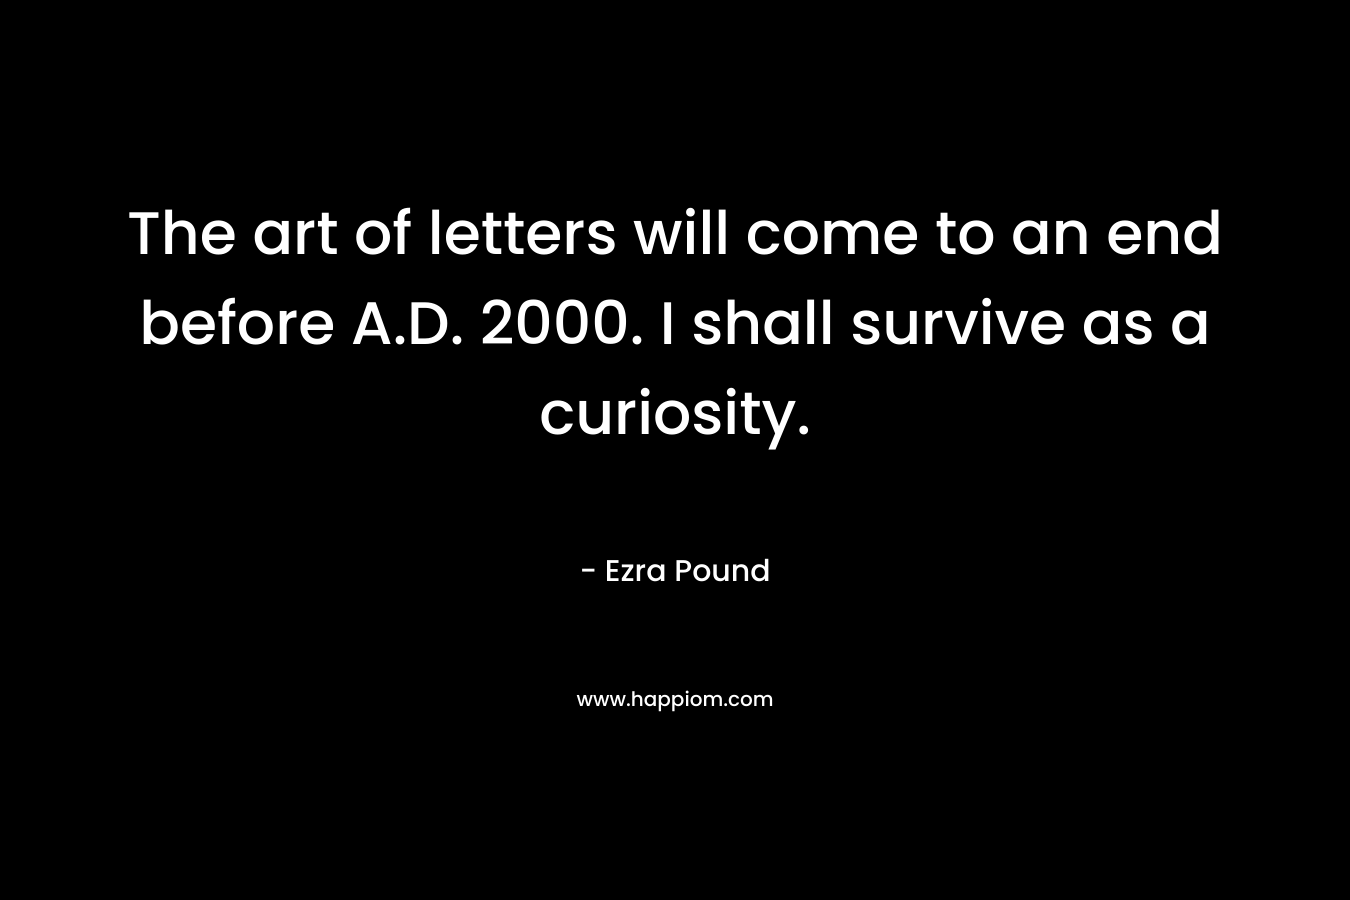 The art of letters will come to an end before A.D. 2000. I shall survive as a curiosity. – Ezra Pound